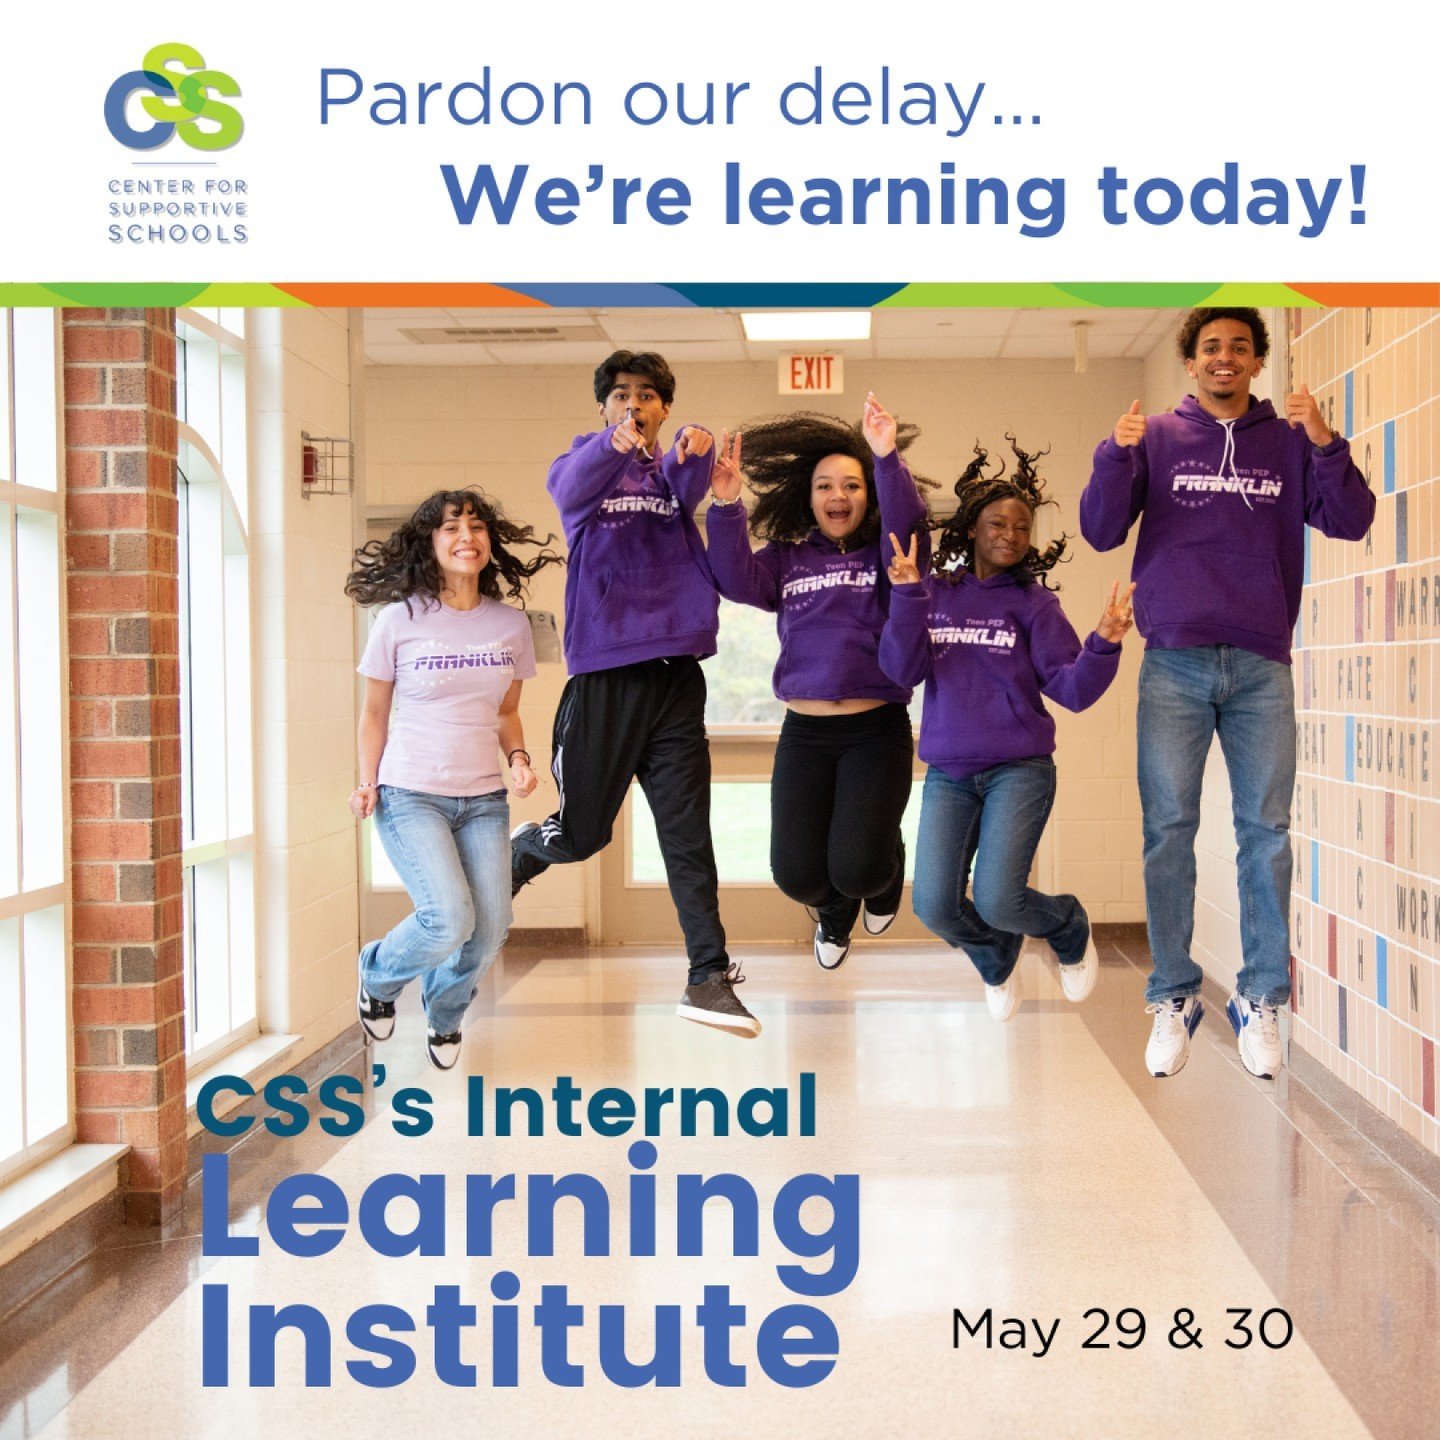 Pardon any delay in us responding to messages...our CSS staff are currently participating in our bi-annual Learning Institute! 

At our Learning Institute, our team comes together to participate in a variety of workshops and sessions led by internal 